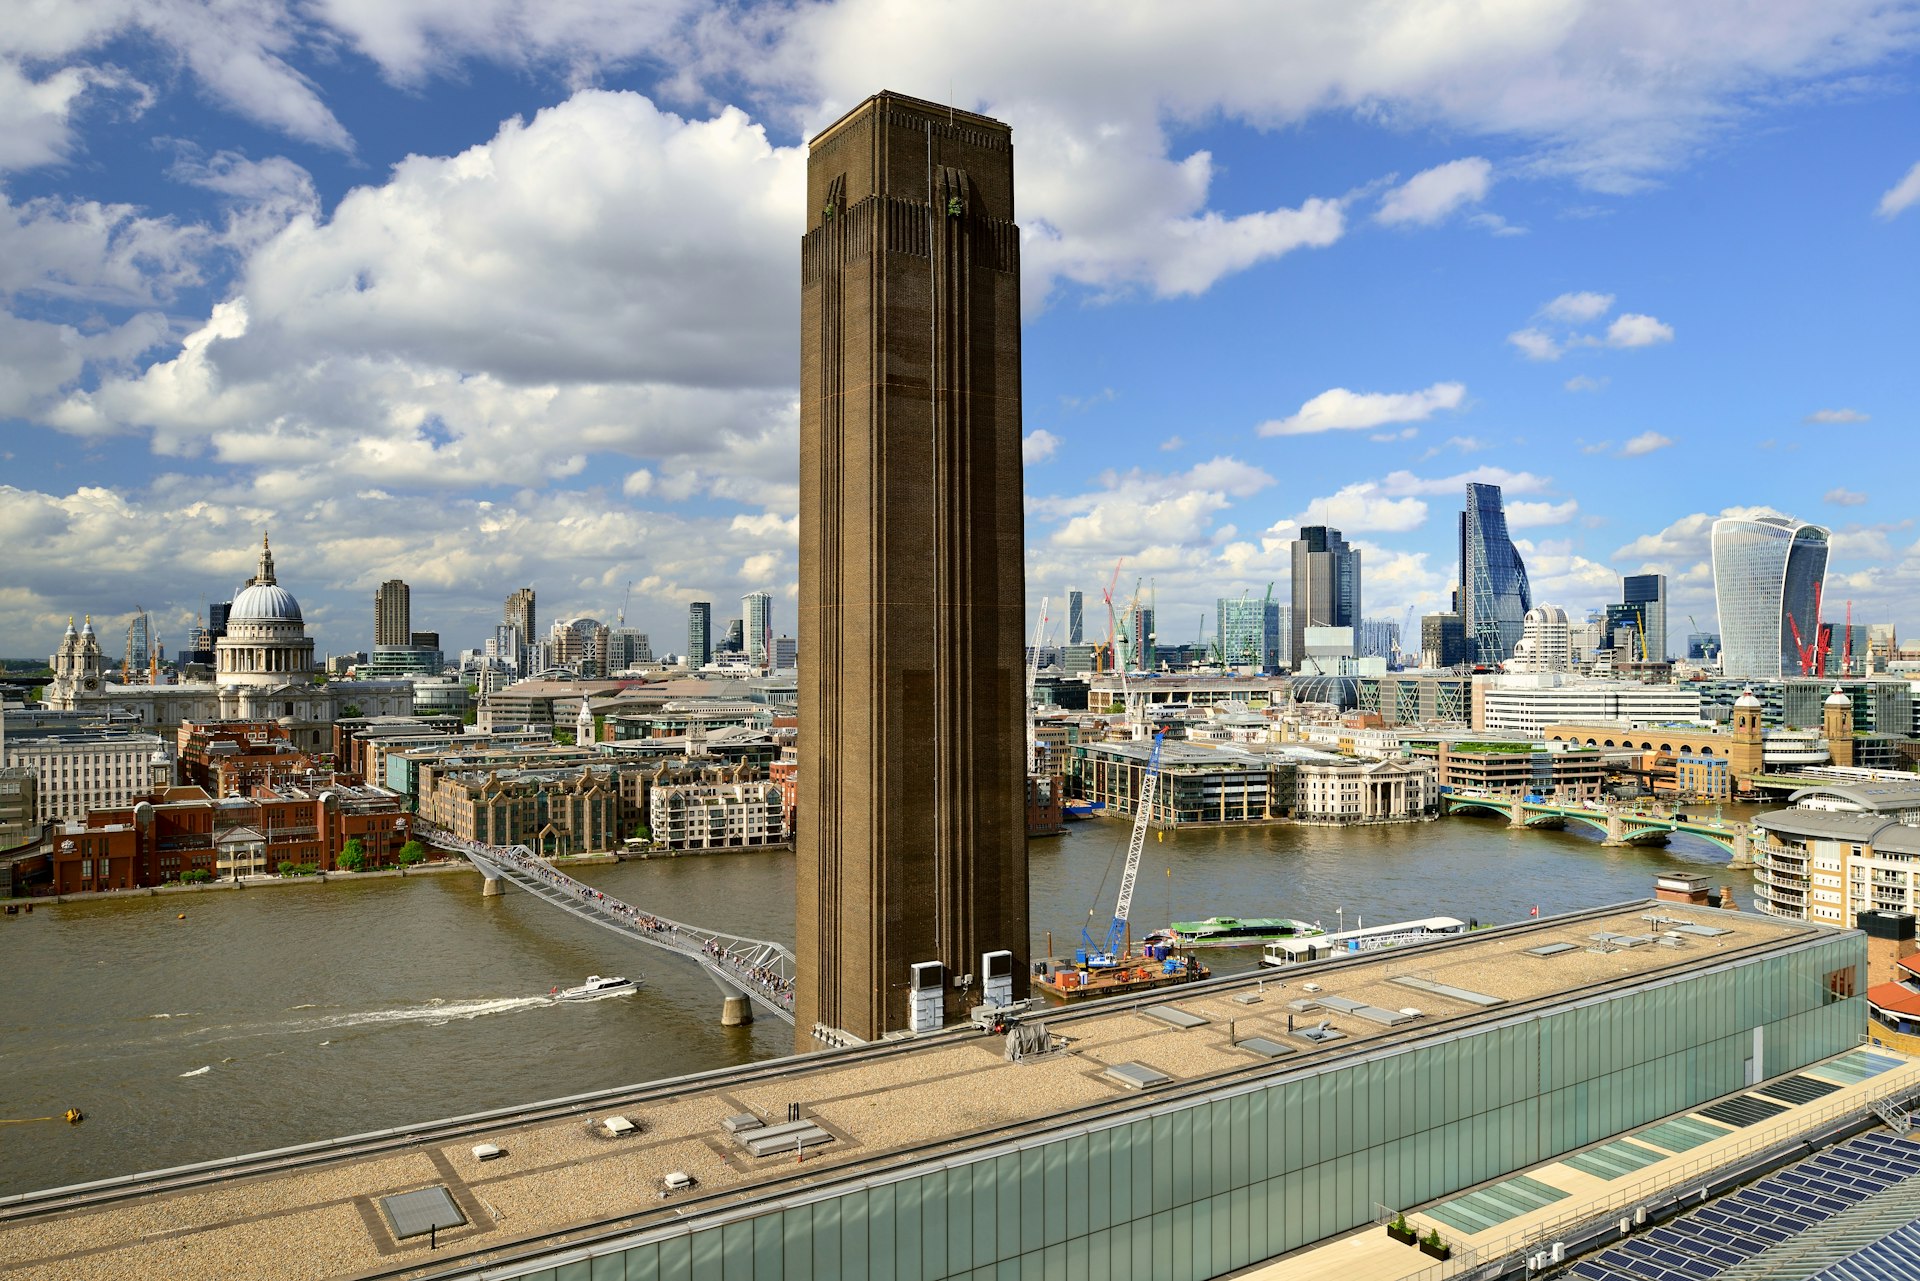 The distinctive brick chimney of Tate Modern art gallery rises up in front of a view of the London skyline across the river Thames